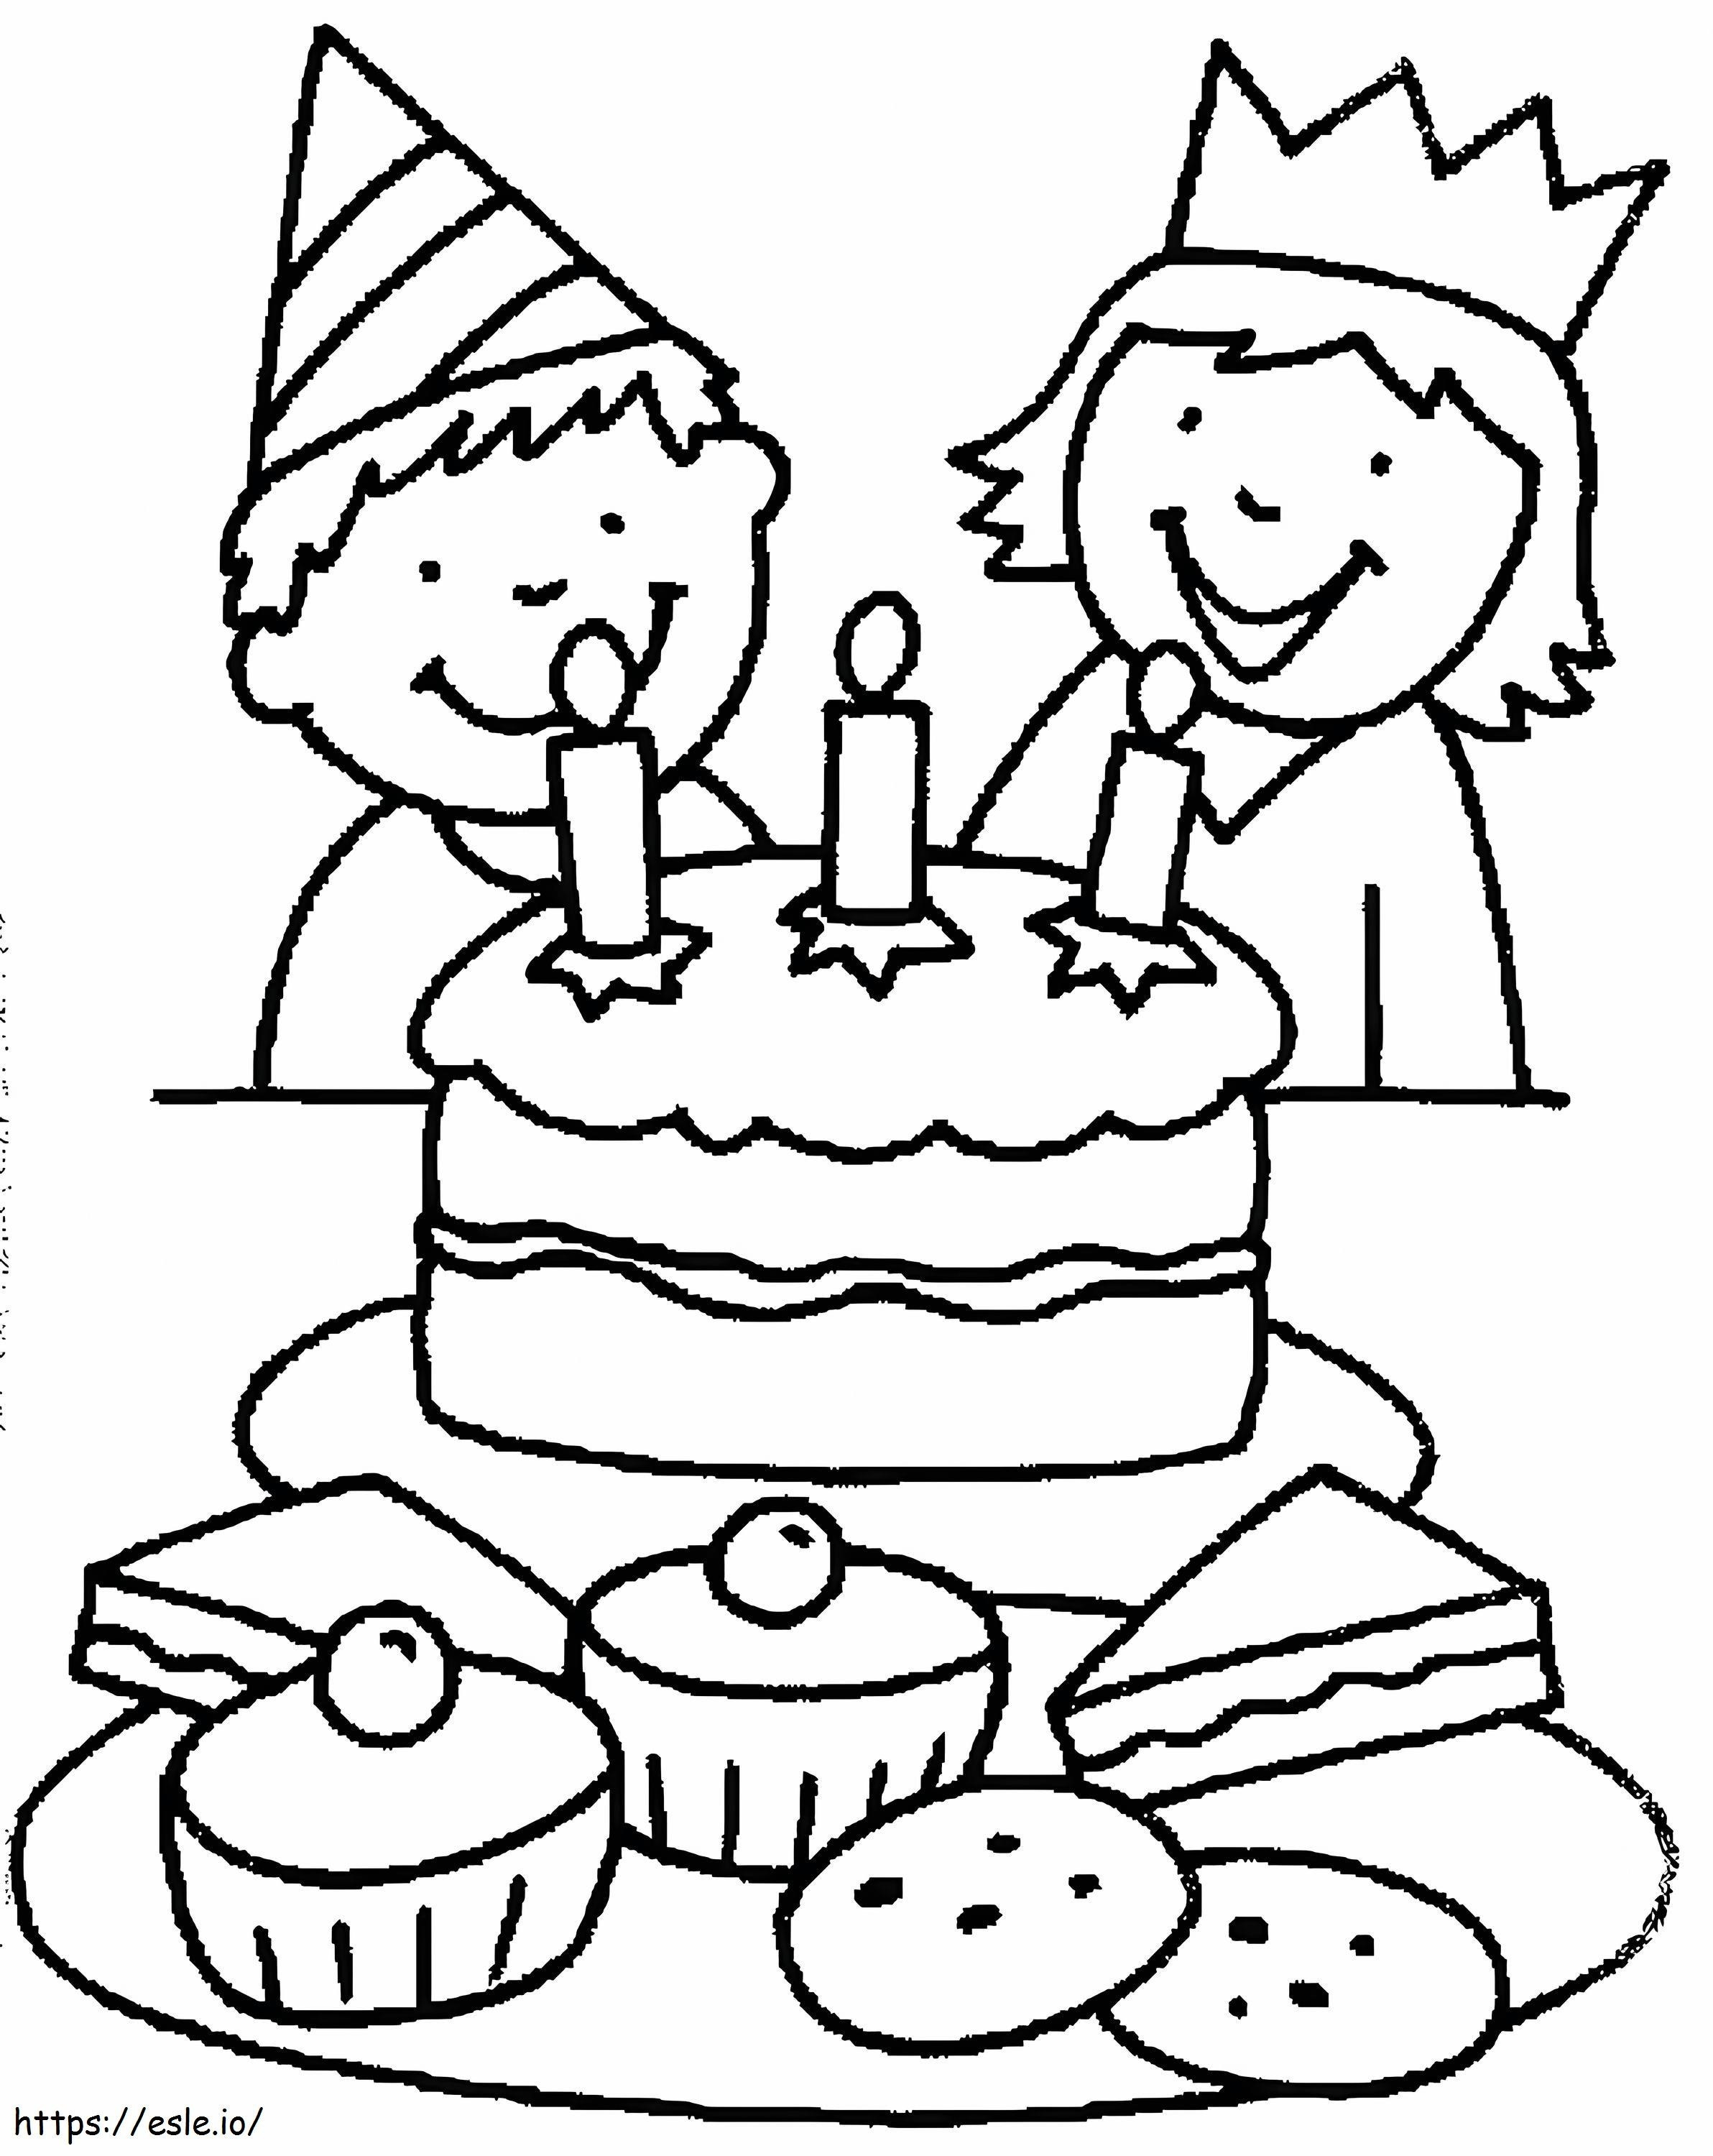 Birthday Party 5 coloring page